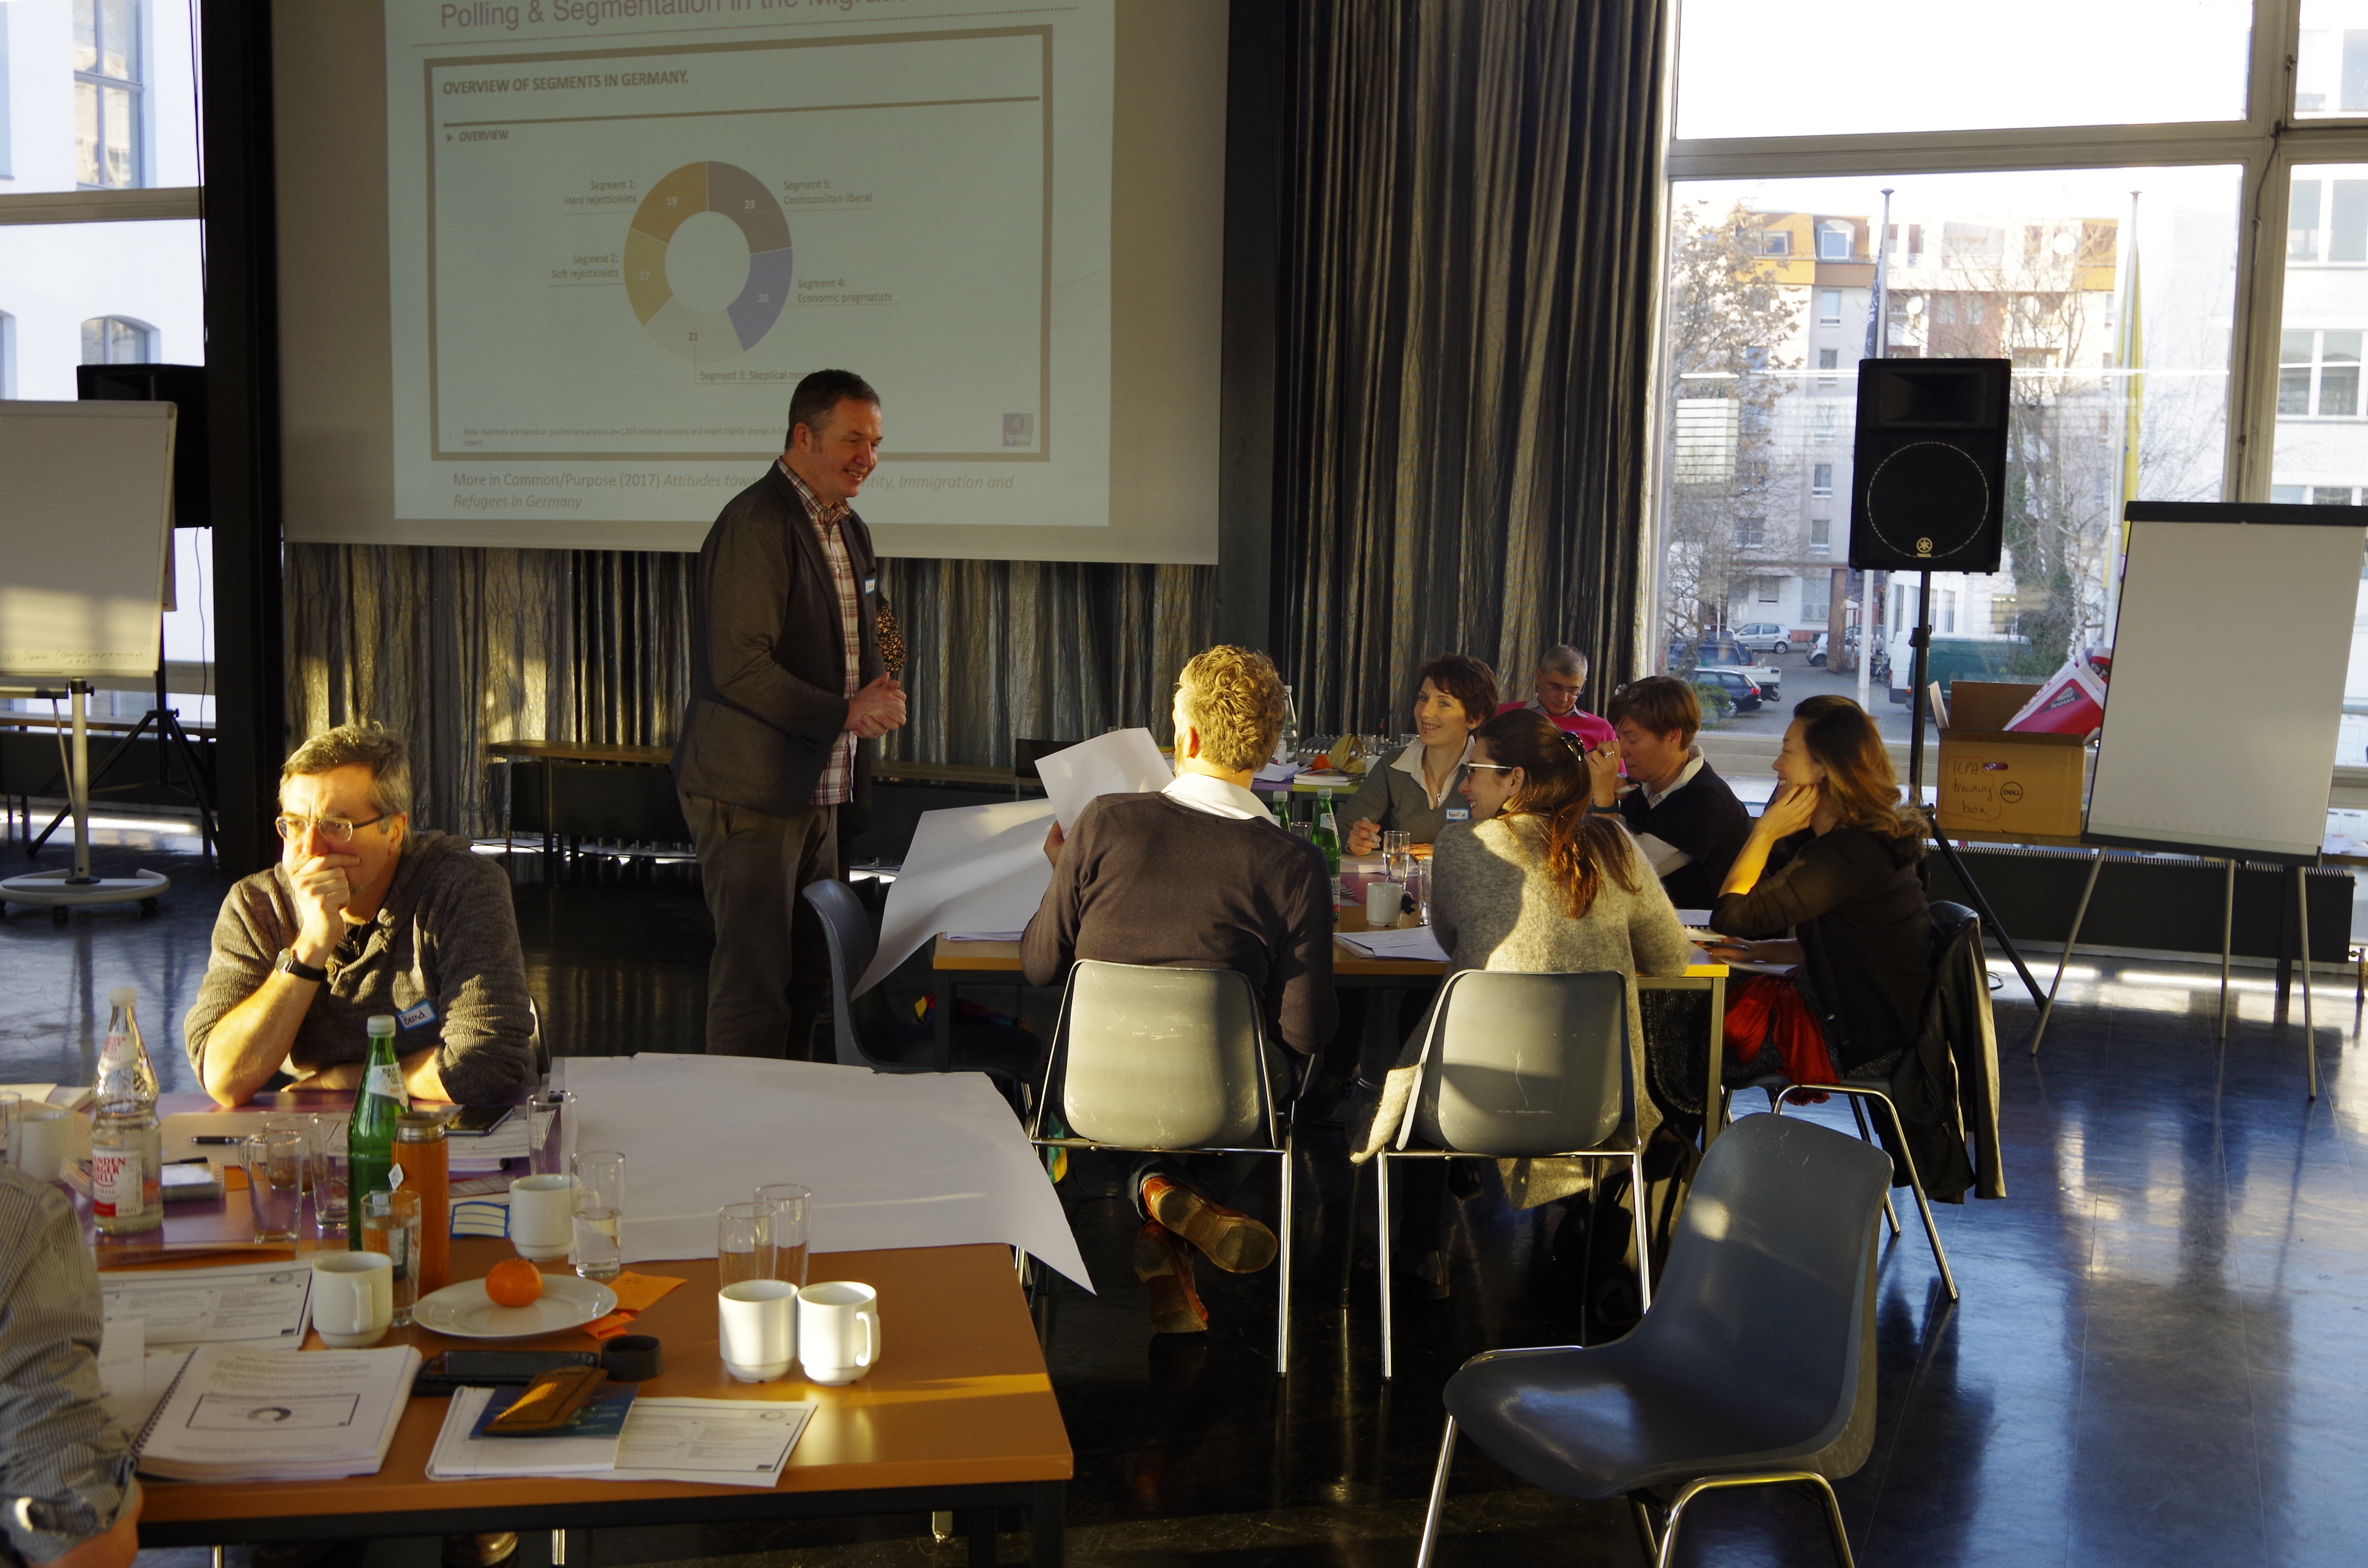 Our trainer, Eóin Young, explaining German segmentation research to participants